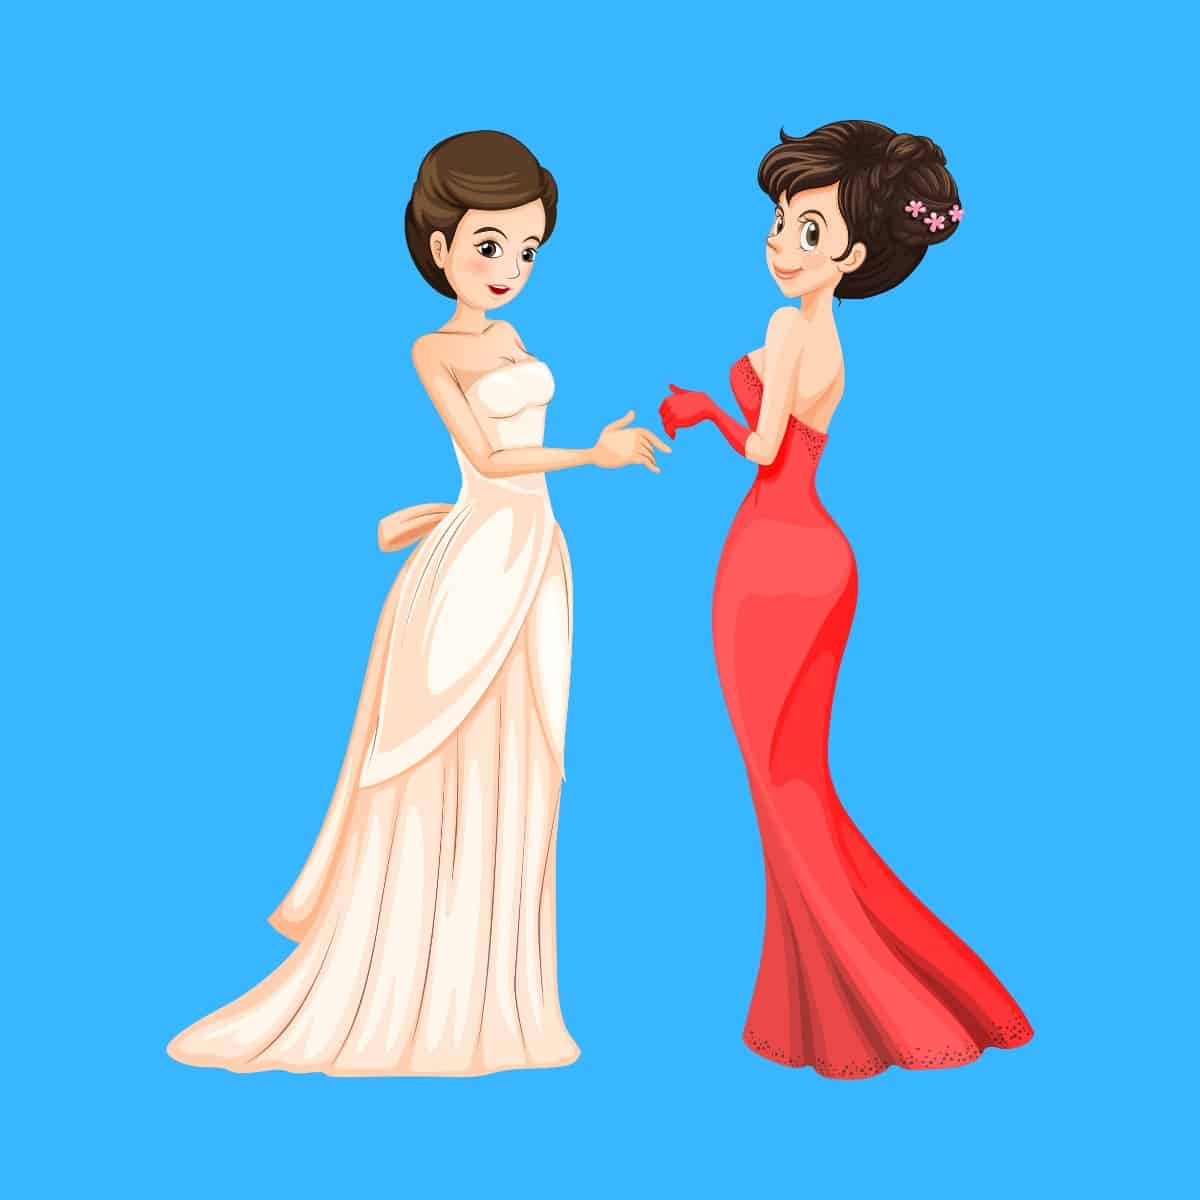 Cartoon graphic of two beautiful women in full length dresses on a blue background.